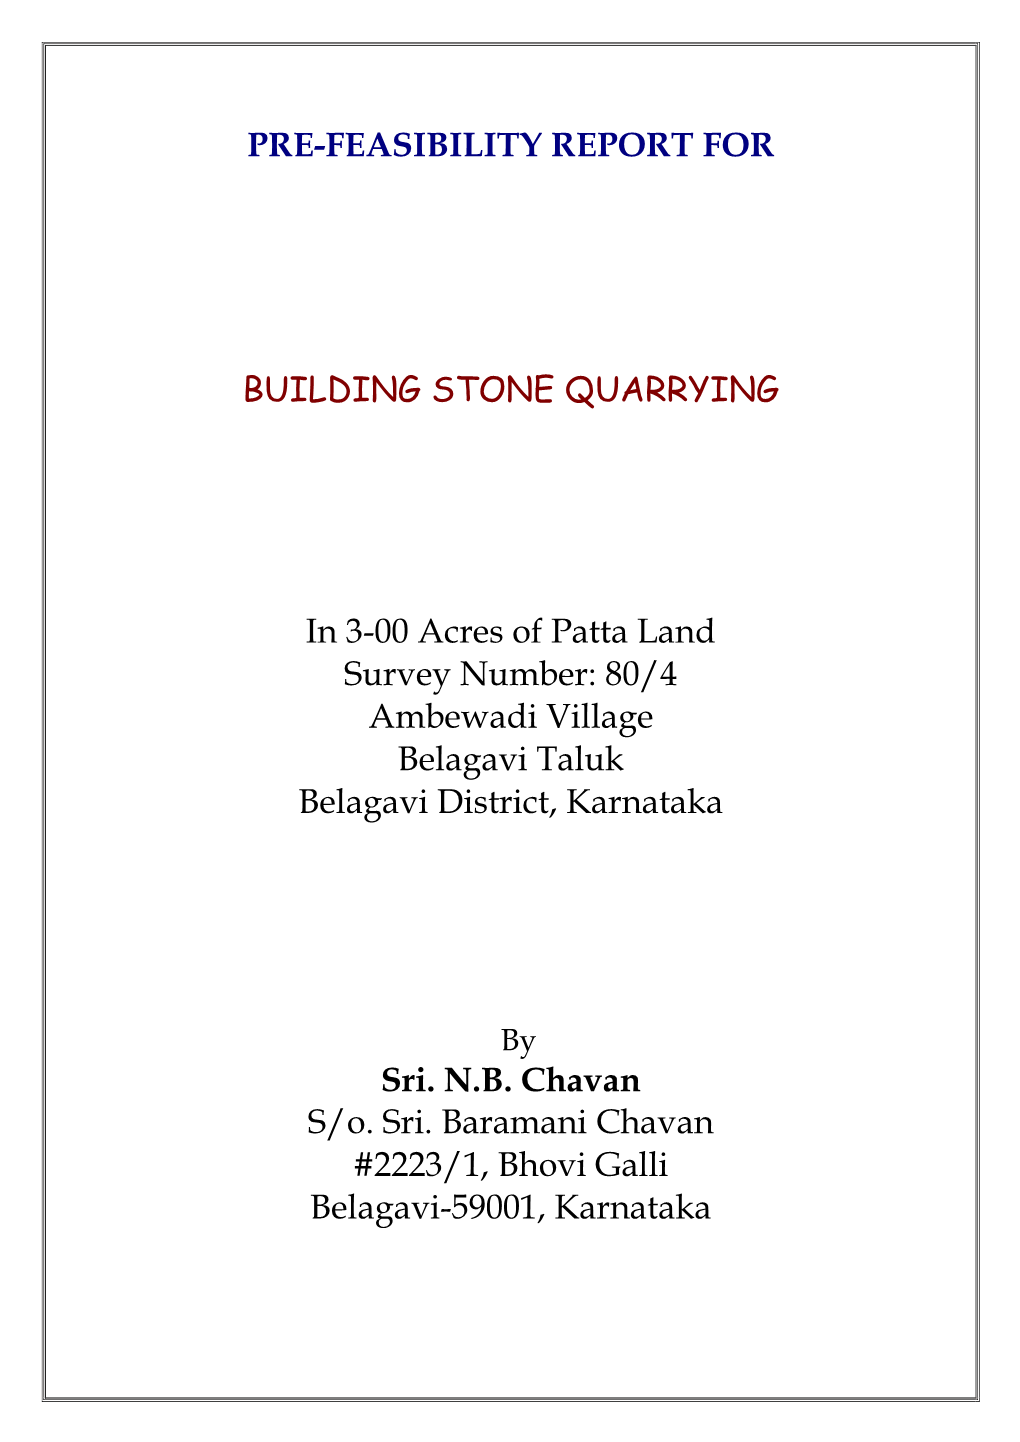 PRE-FEASIBILITY REPORT for BUILDING STONE QUARRYING In